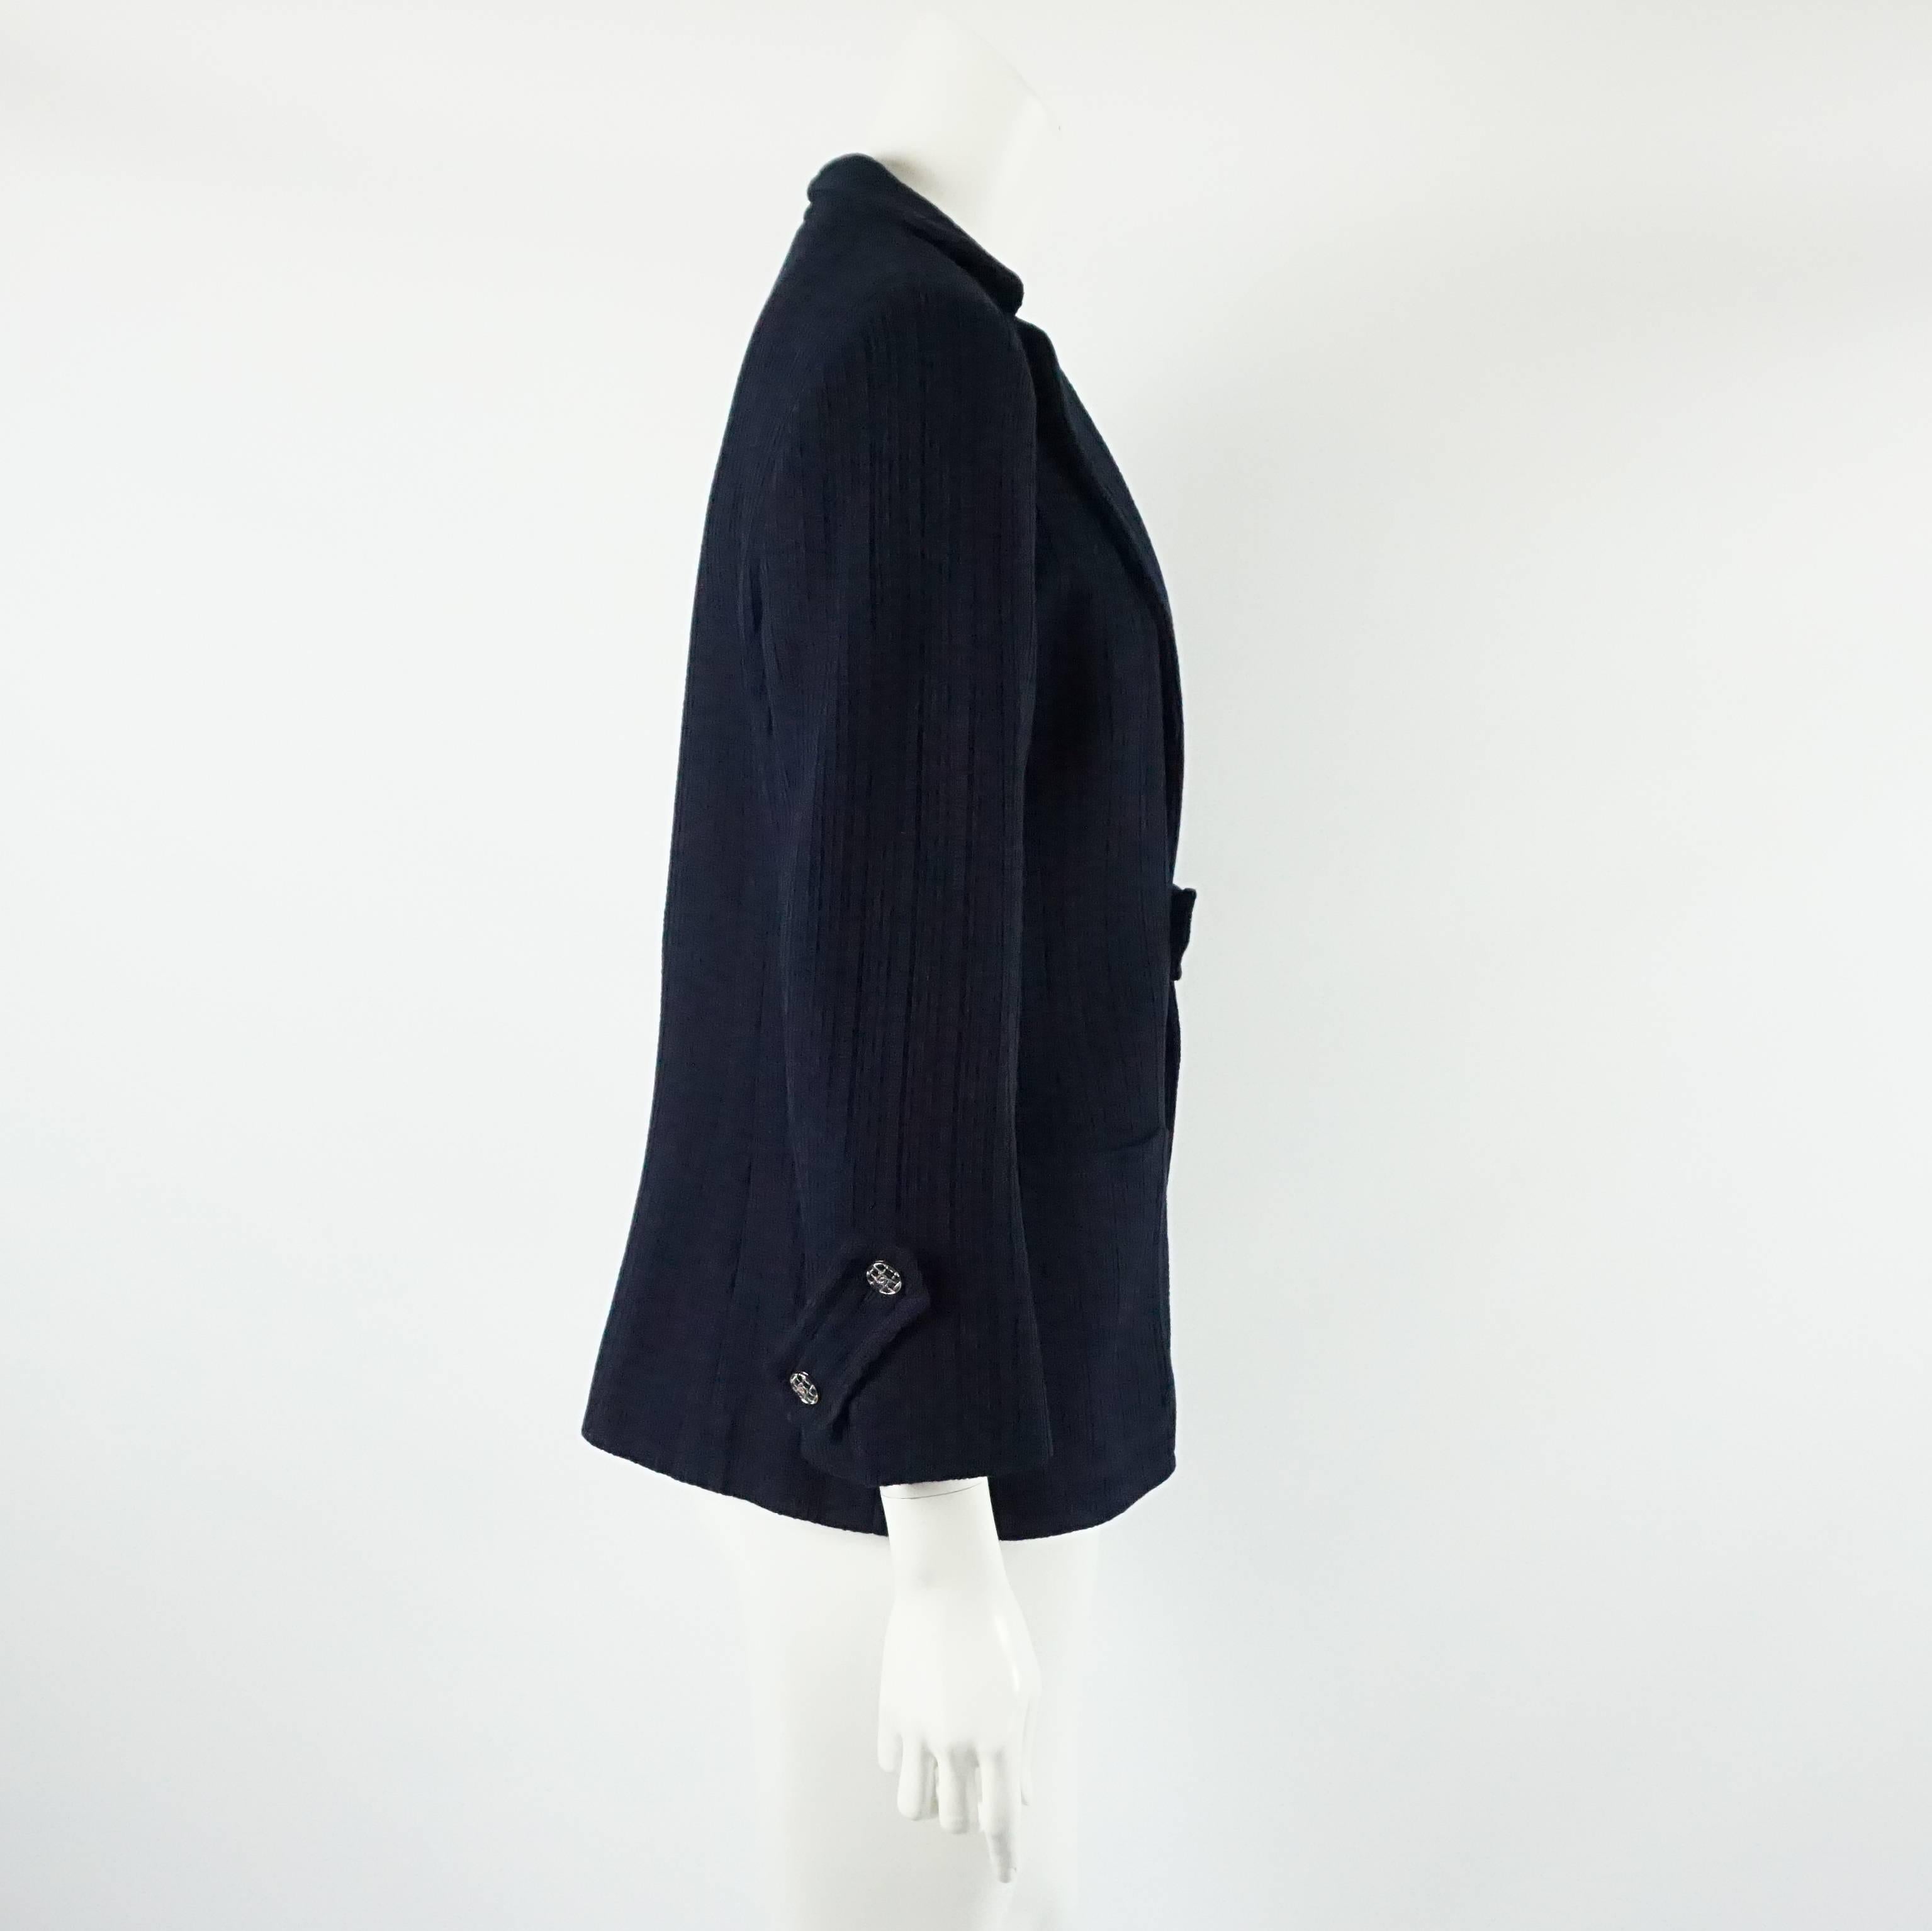 This Chanel navy cotton jacket has an open style with a strip of fabric in the center acting as a closure. It has silver and navy enamel buttons with center 